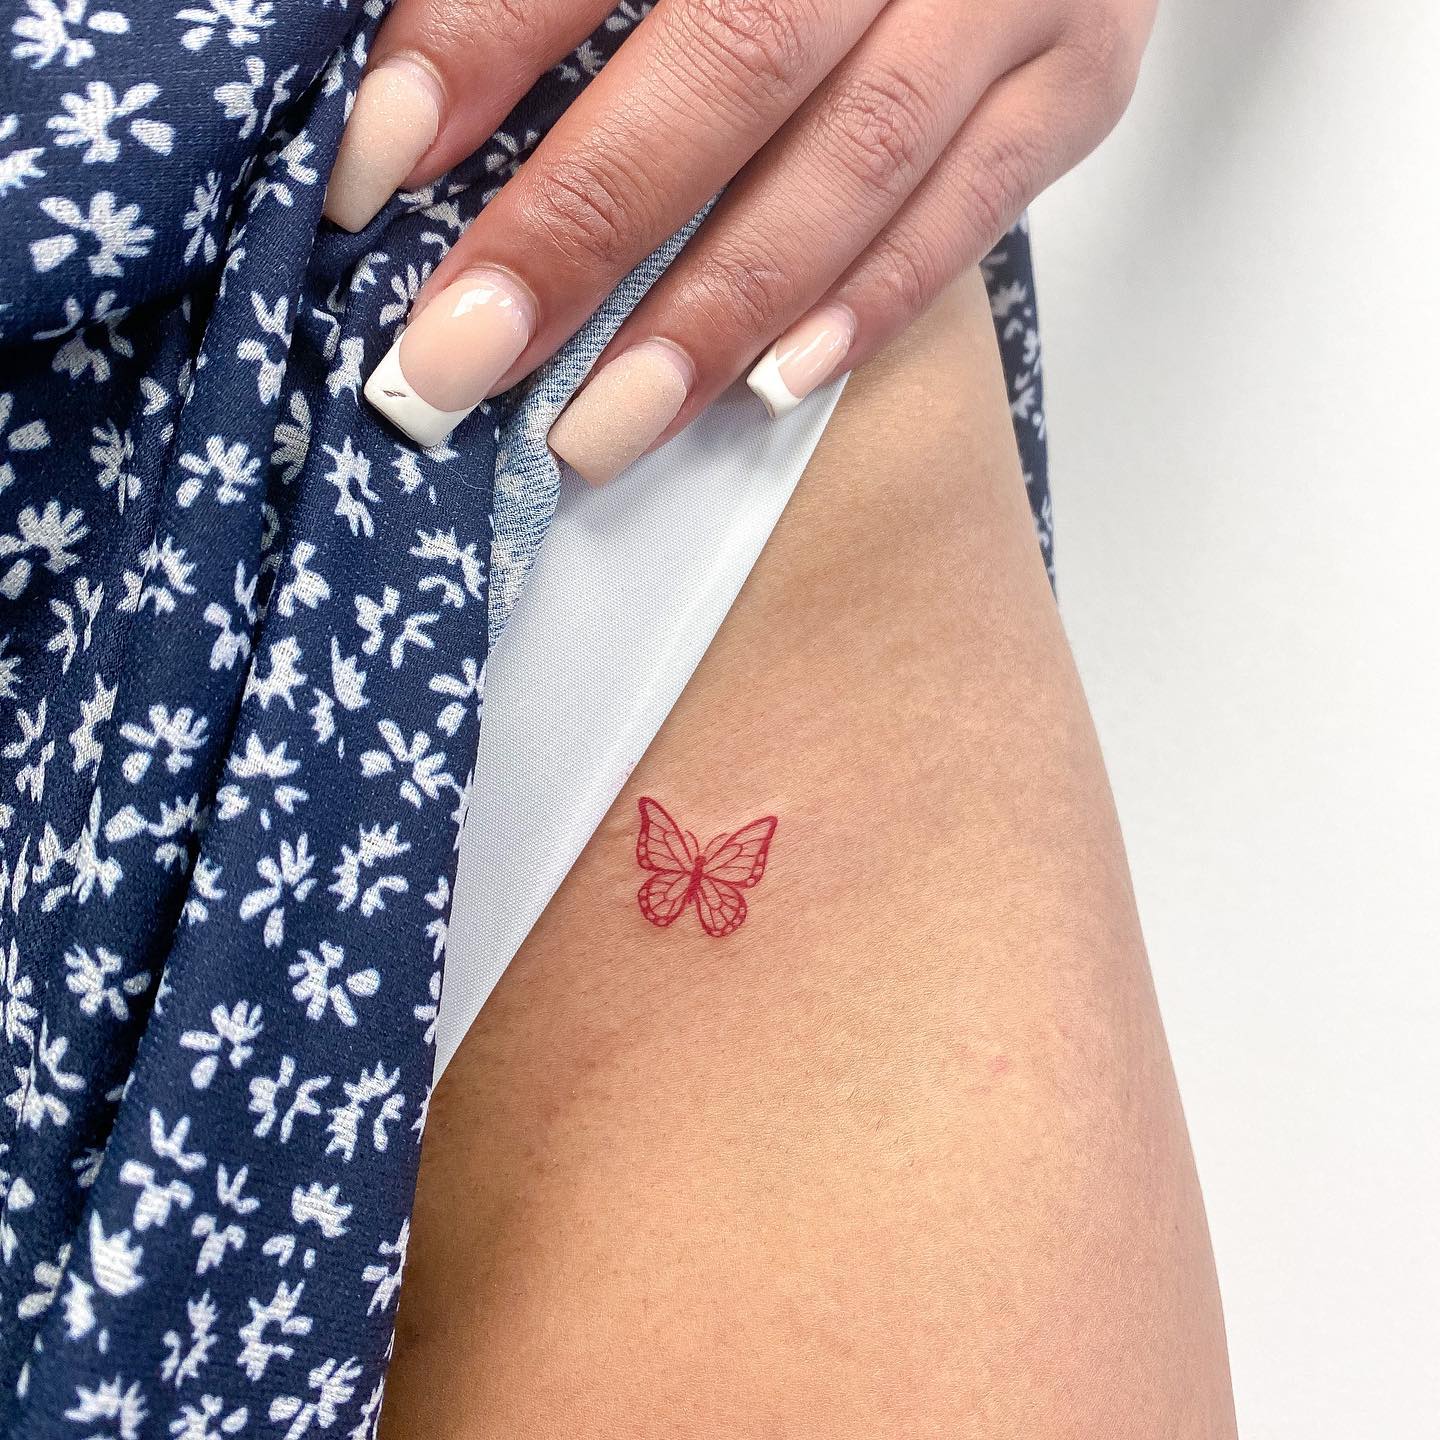 Tiny red butterfly tattoo on thigh 